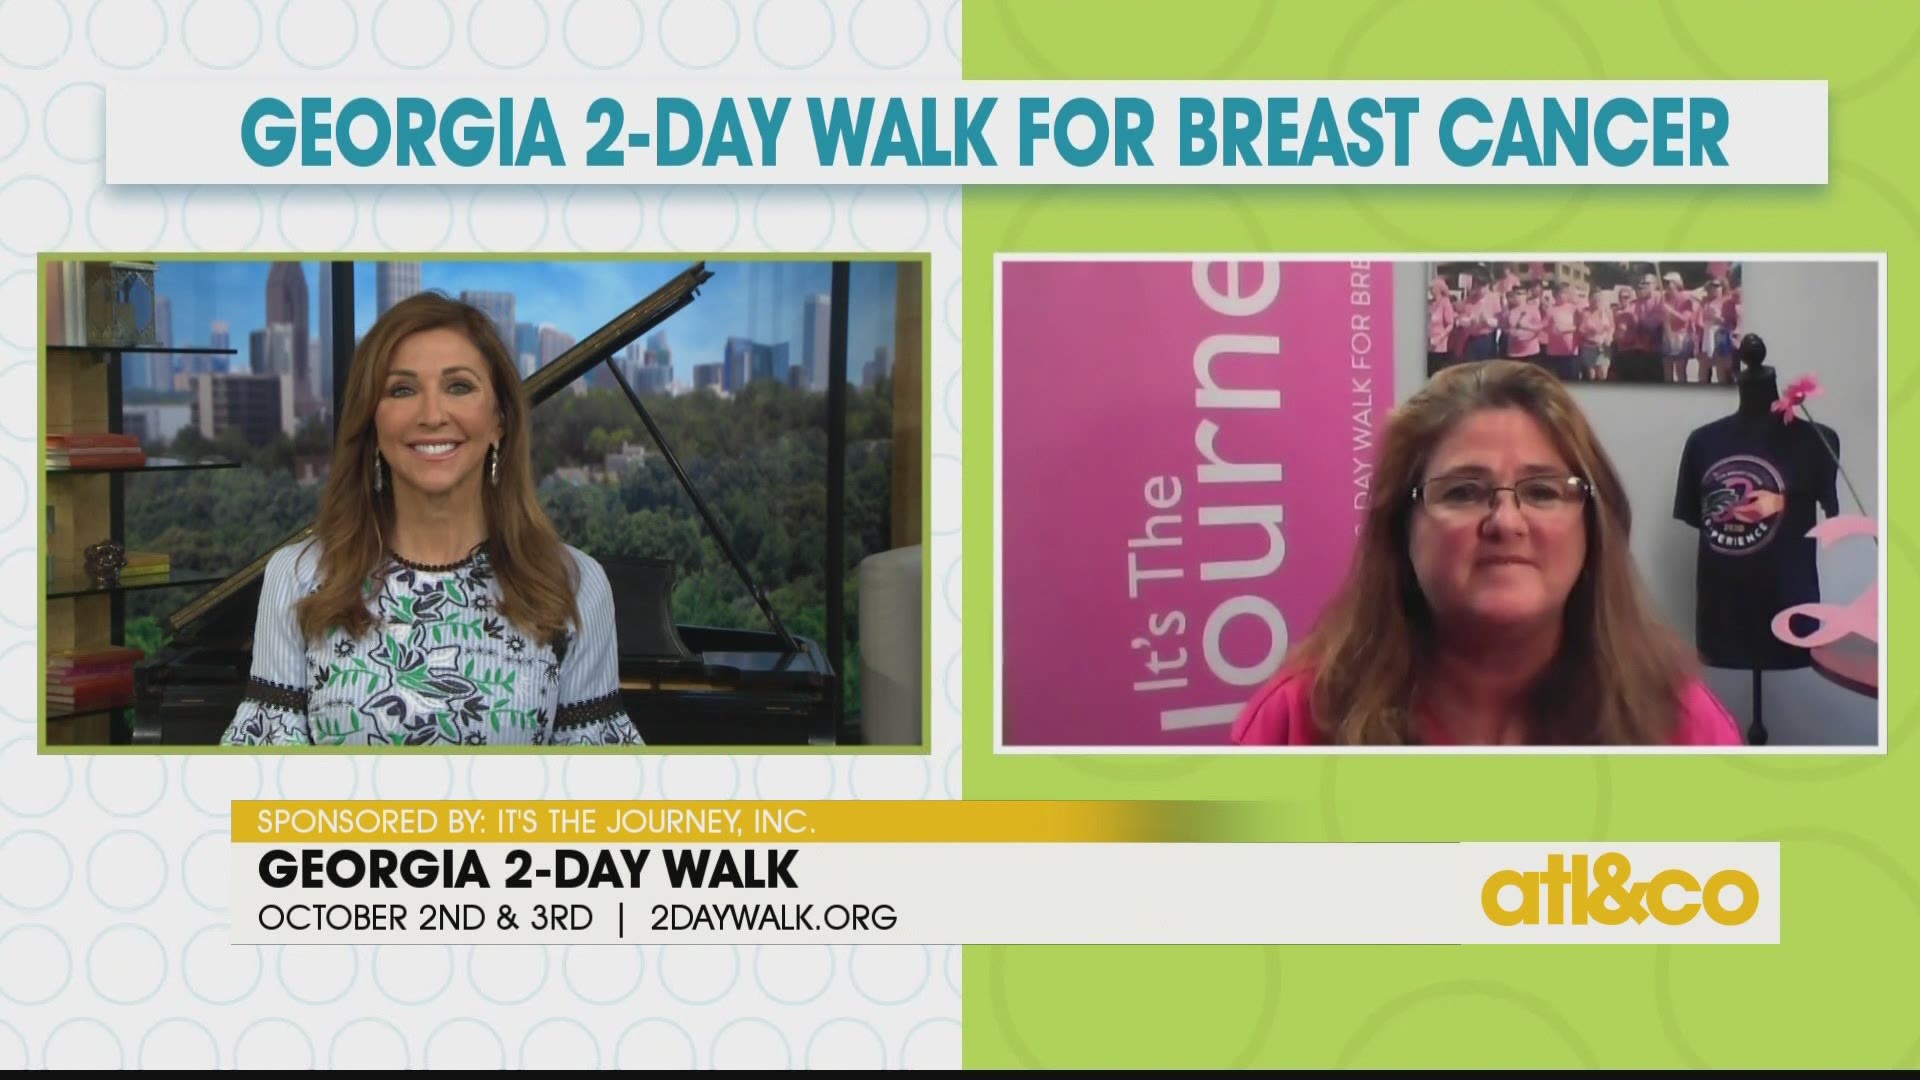 'It's The Journey, Inc.' shares how you can get involved in the Georgia 2-Day Walk for Breast Cancer and support important programs that are saving lives.